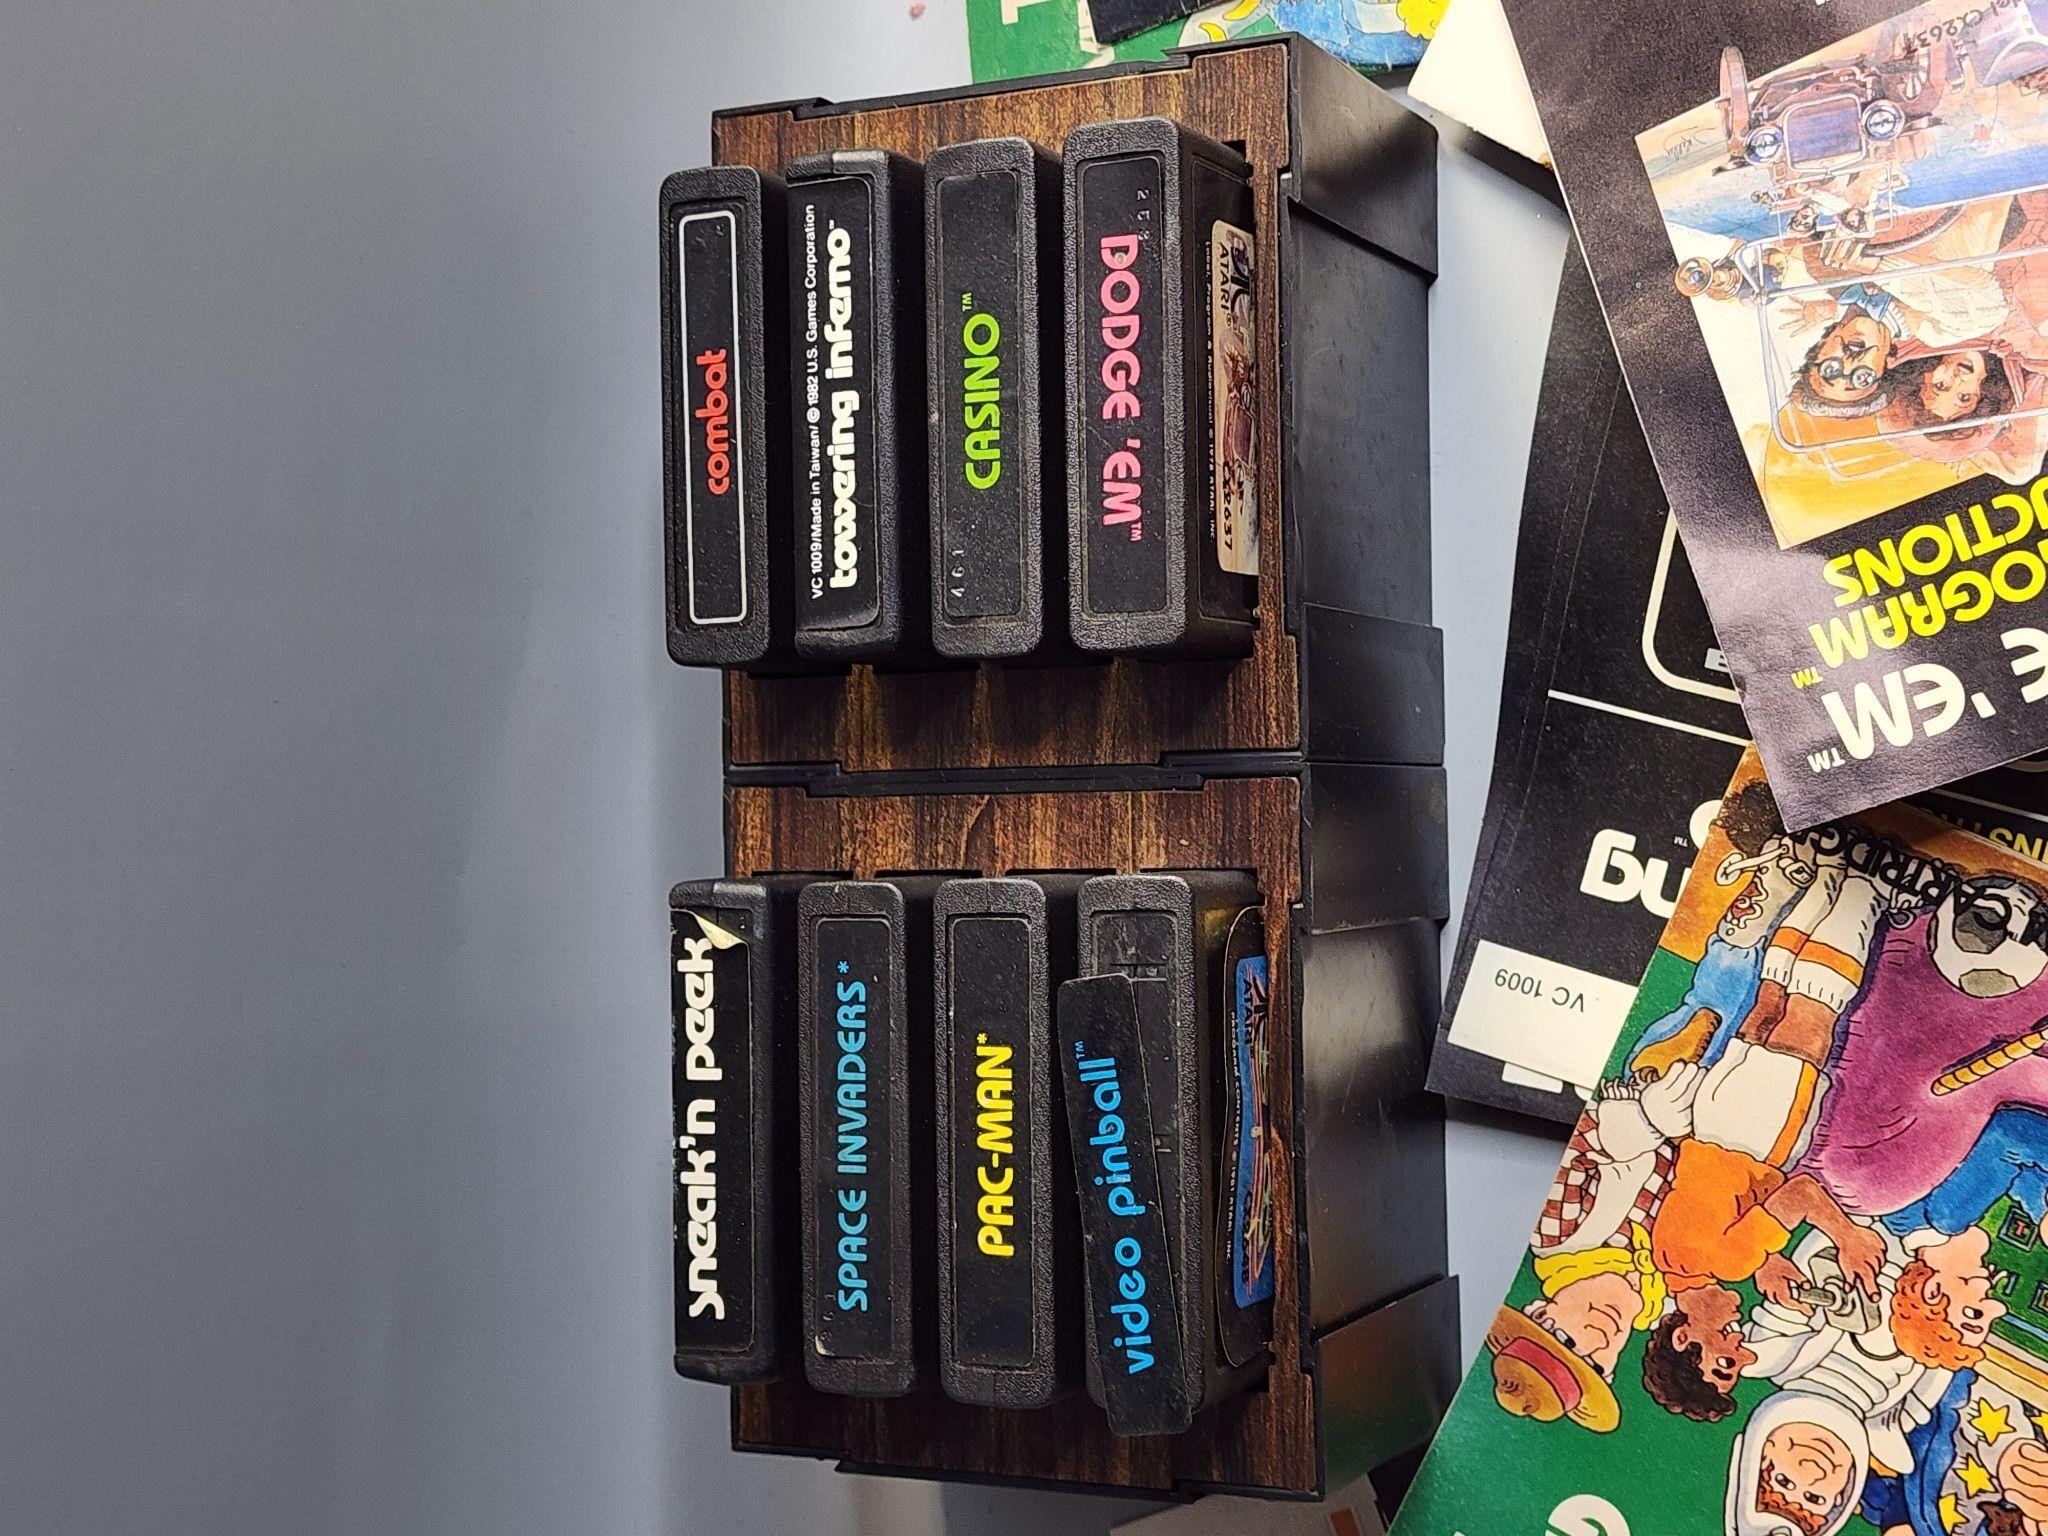 8 Atari games with holder and books